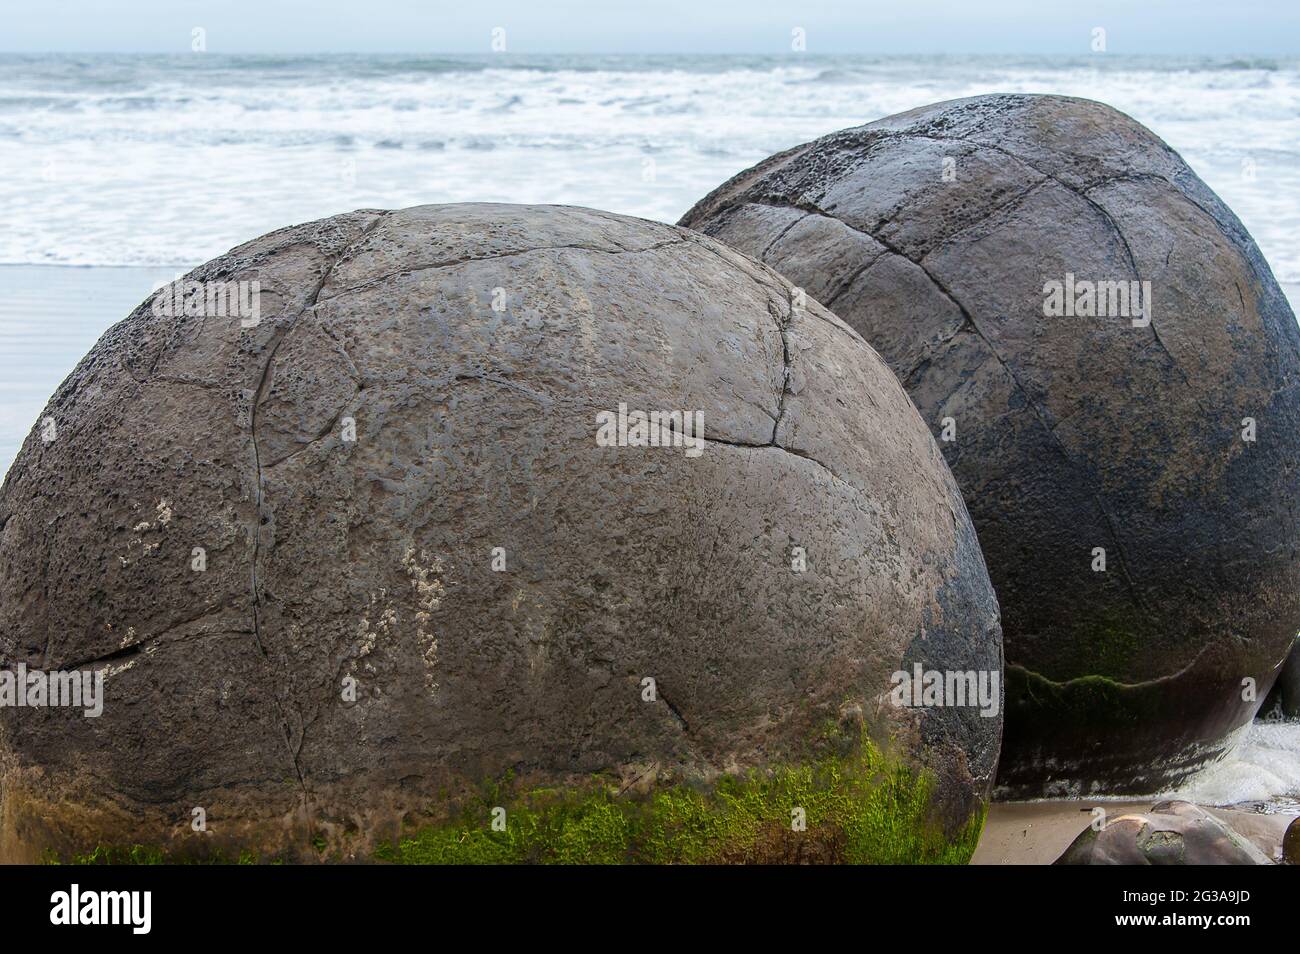 The Moeraki Boulders on Koekohe Beach, Otago. Close up view of a two moss covered spherical rocks, with grey sea/sky background Stock Photo